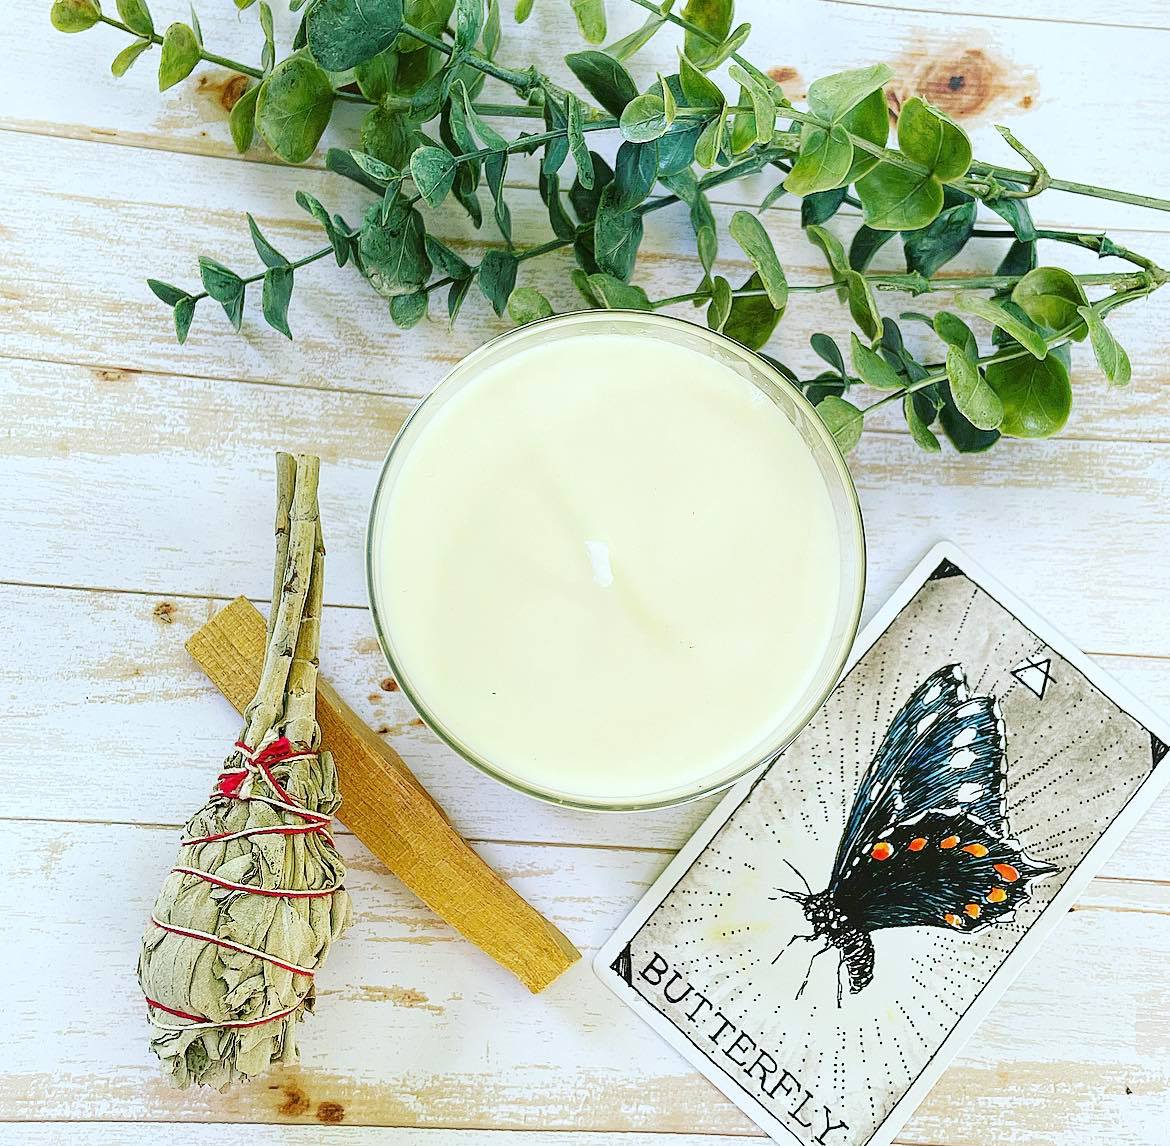 Animal Wisdom Butterfly Candle